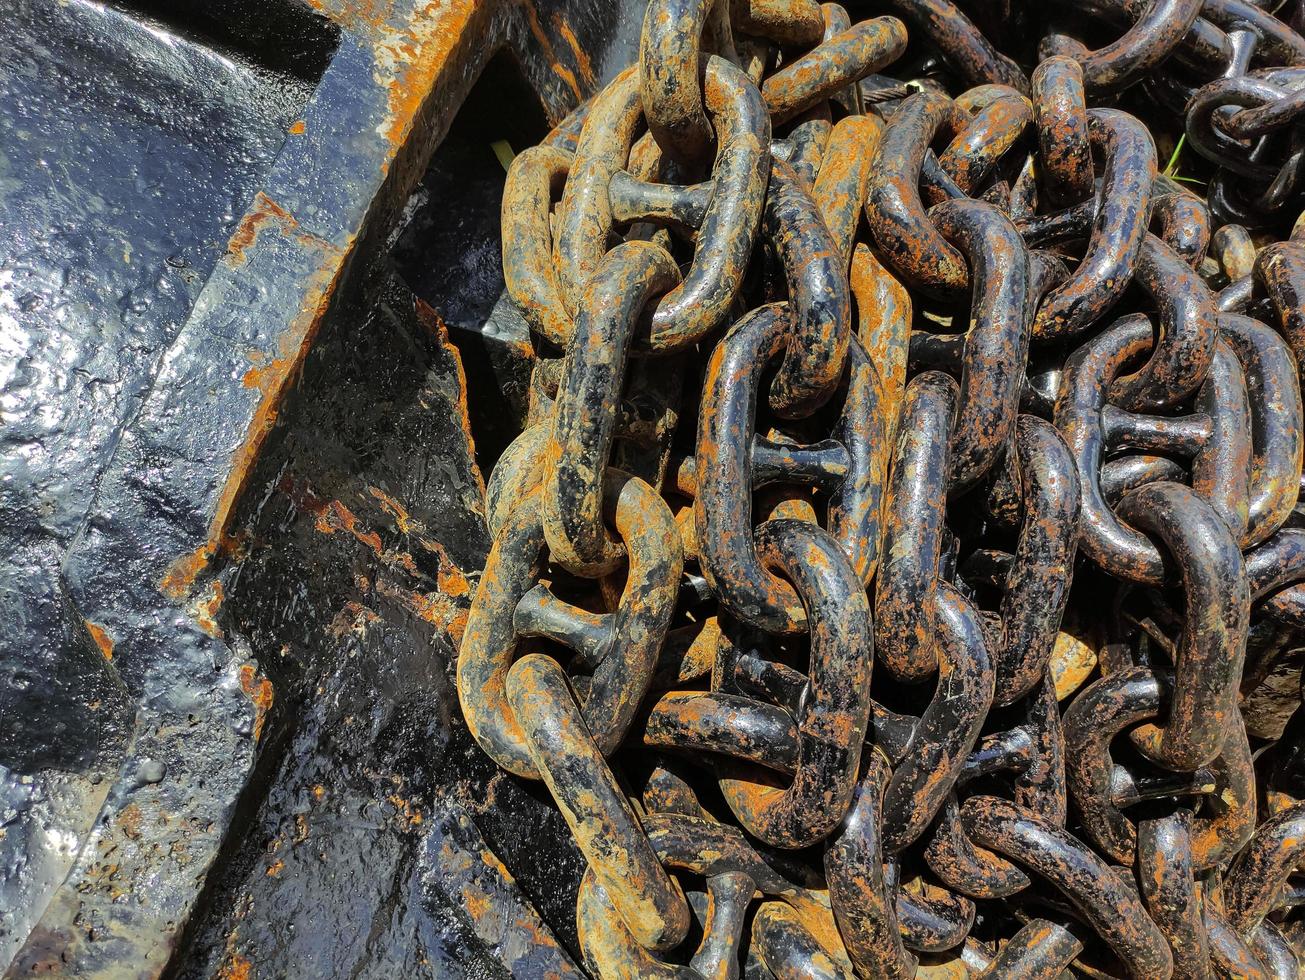 Rows of old rusty ship anchor chain links, close-up photo